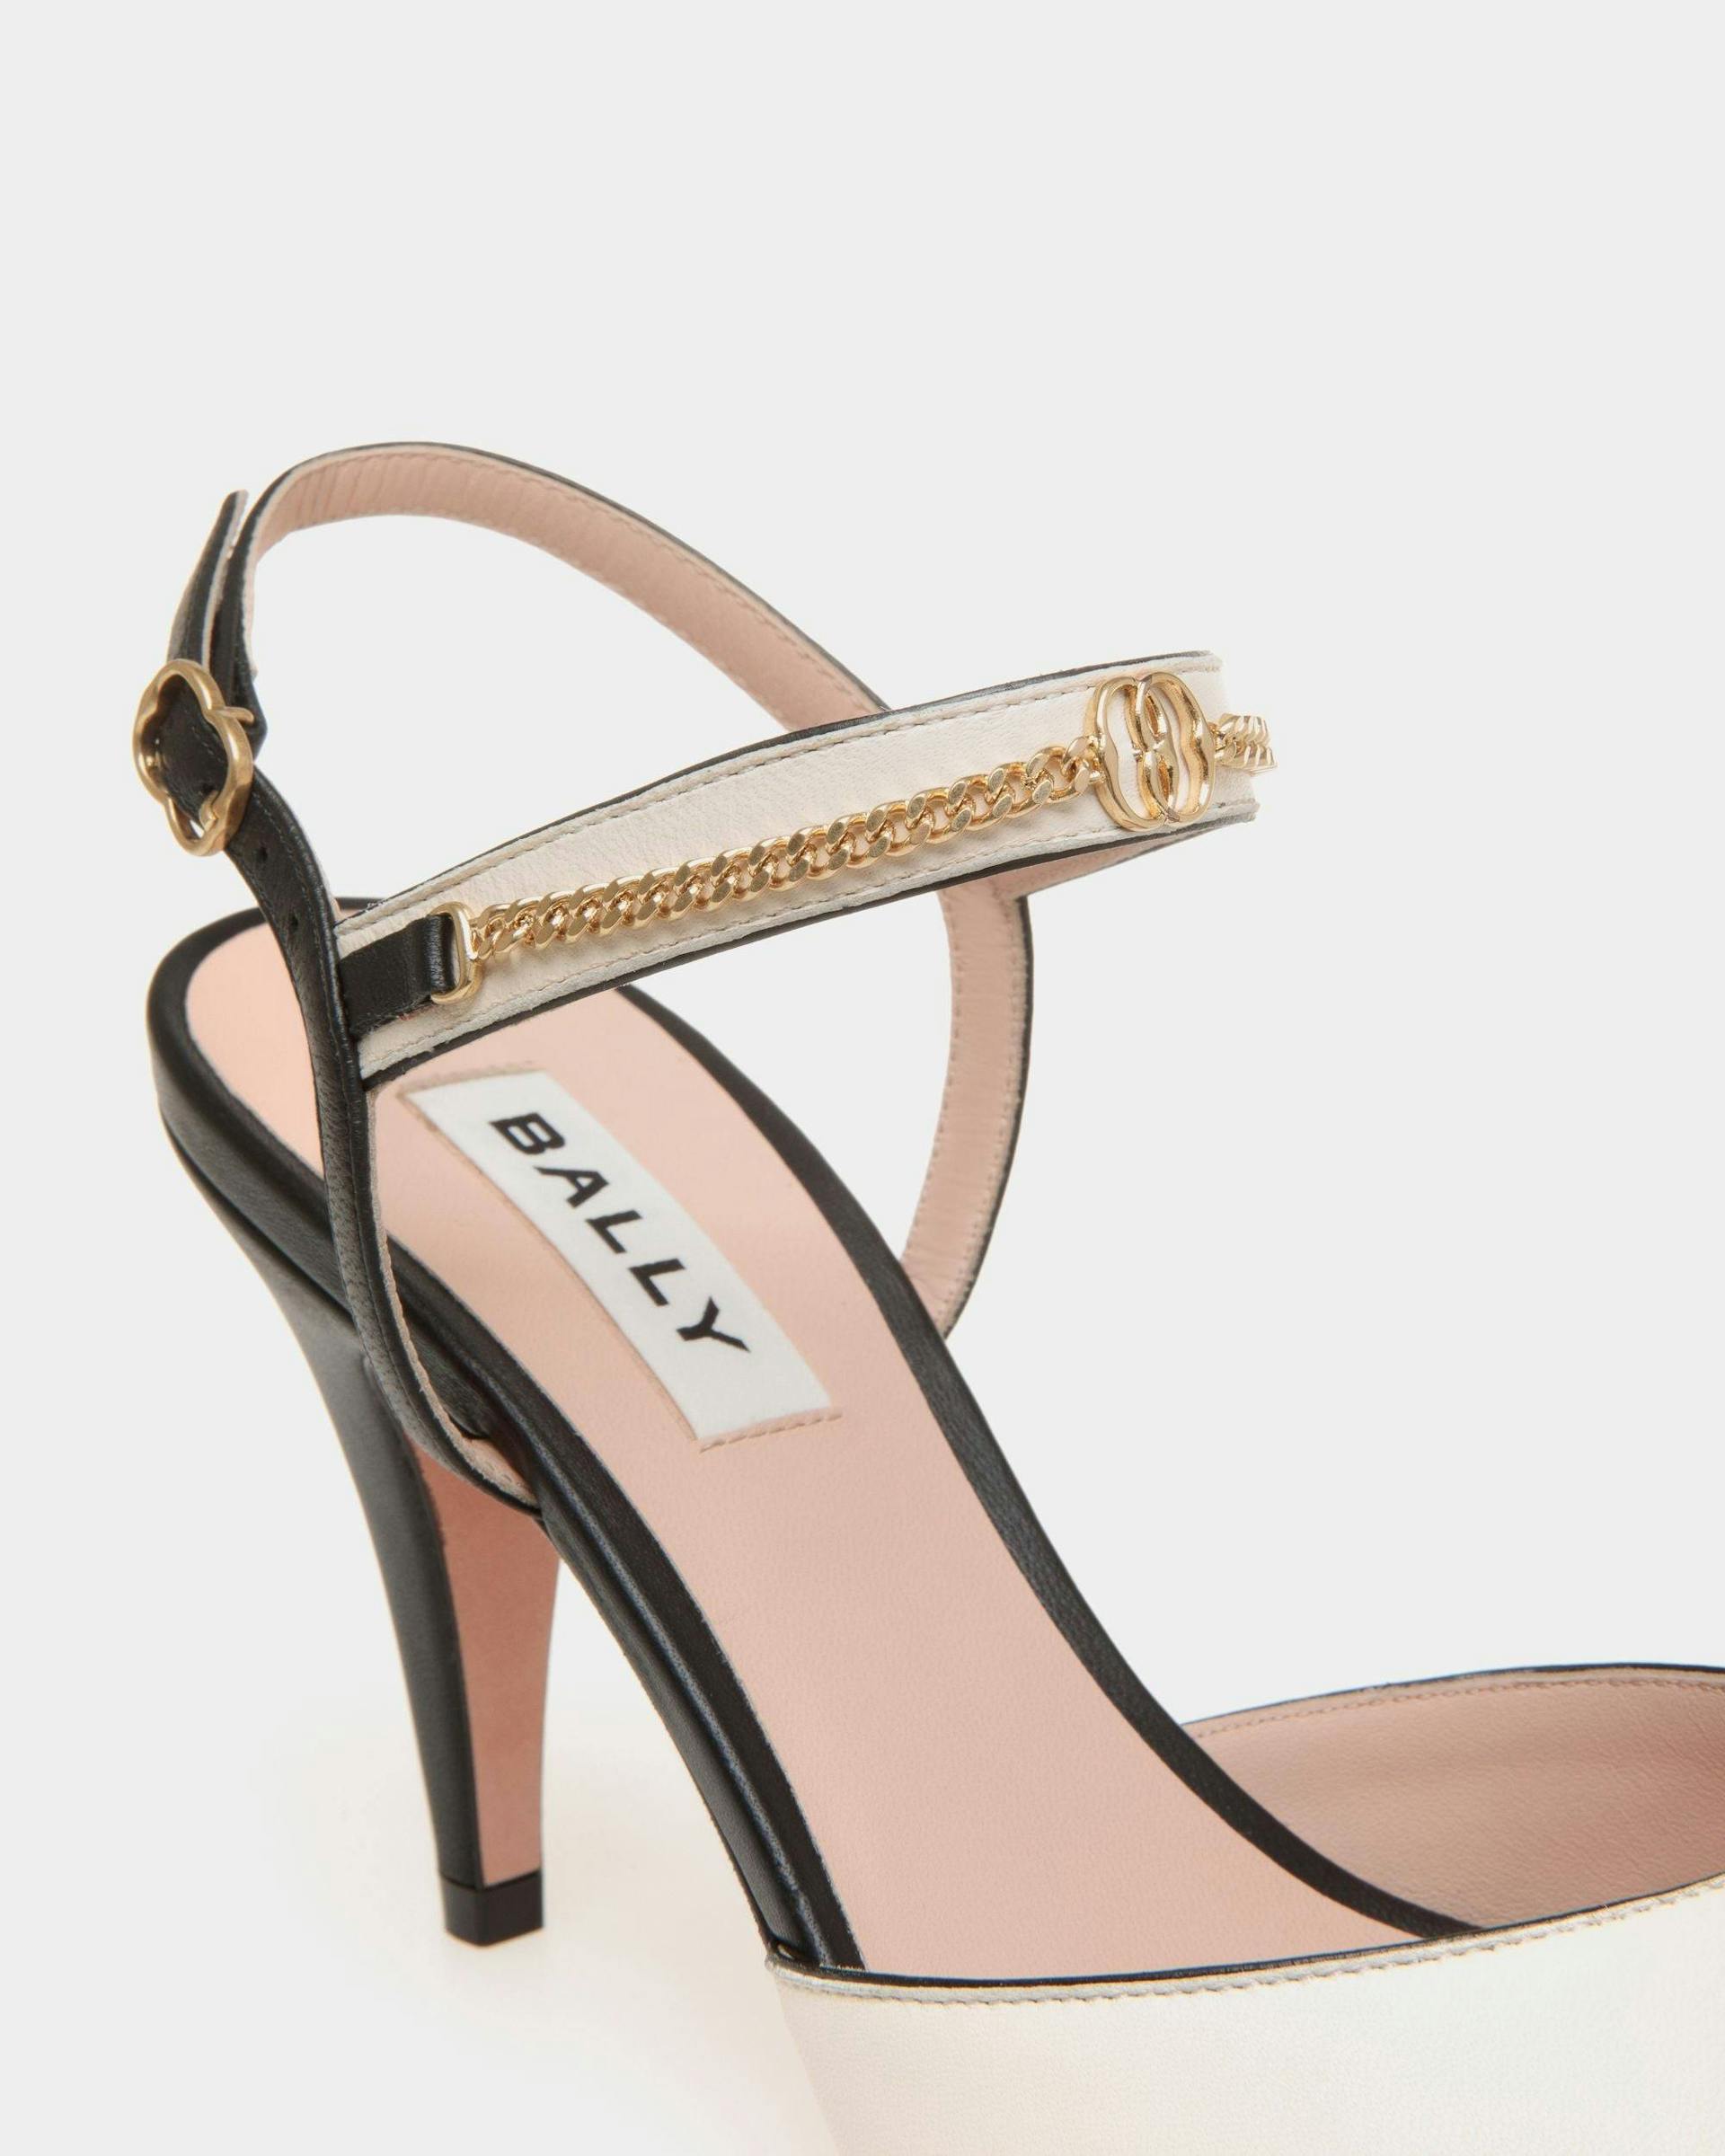 Women's Daily Emblem Heeled Sandal in Black and White Leather | Bally | Still Life Detail